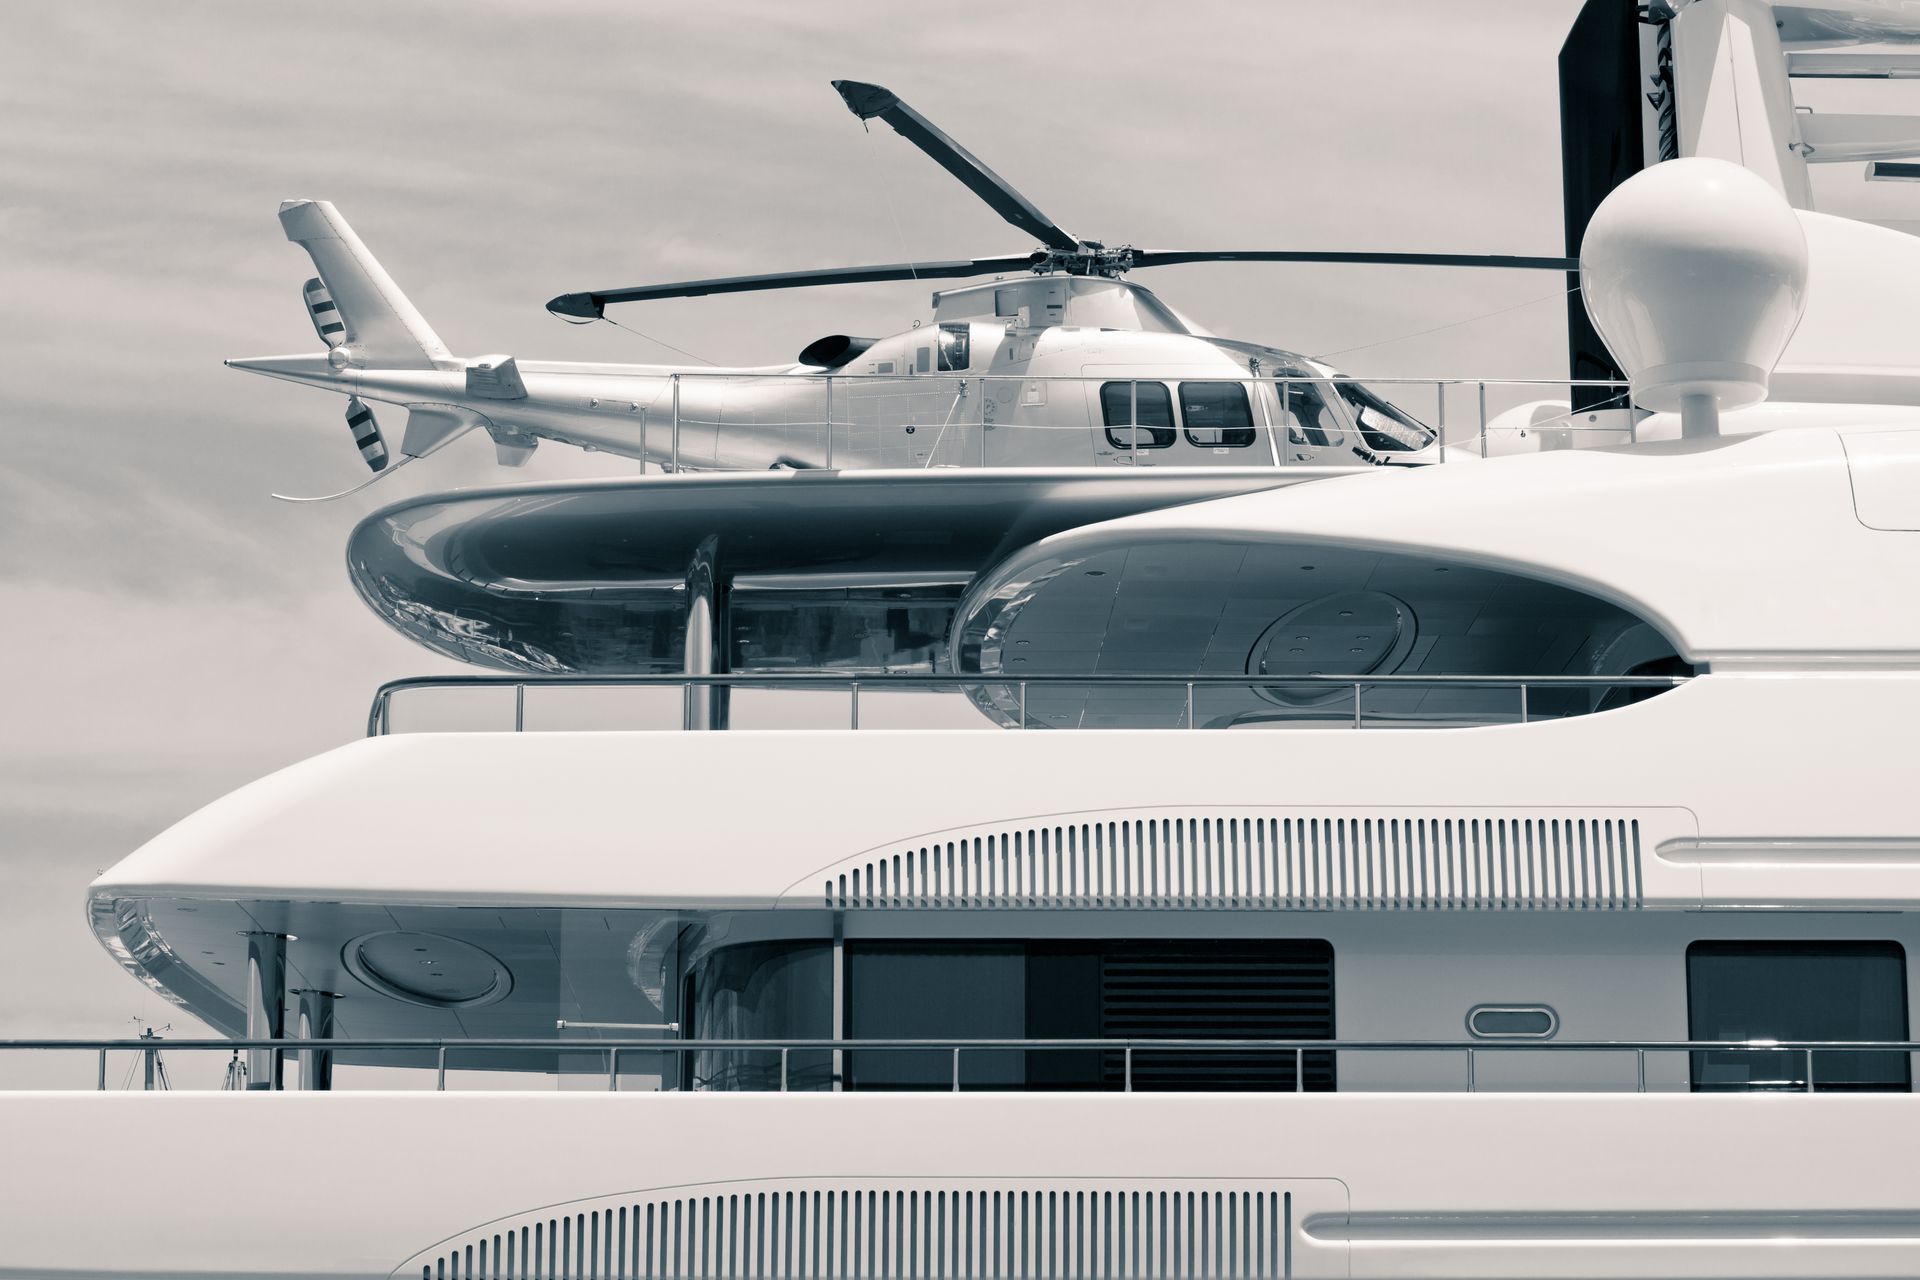 A helicopter landing on a superyacht heliport